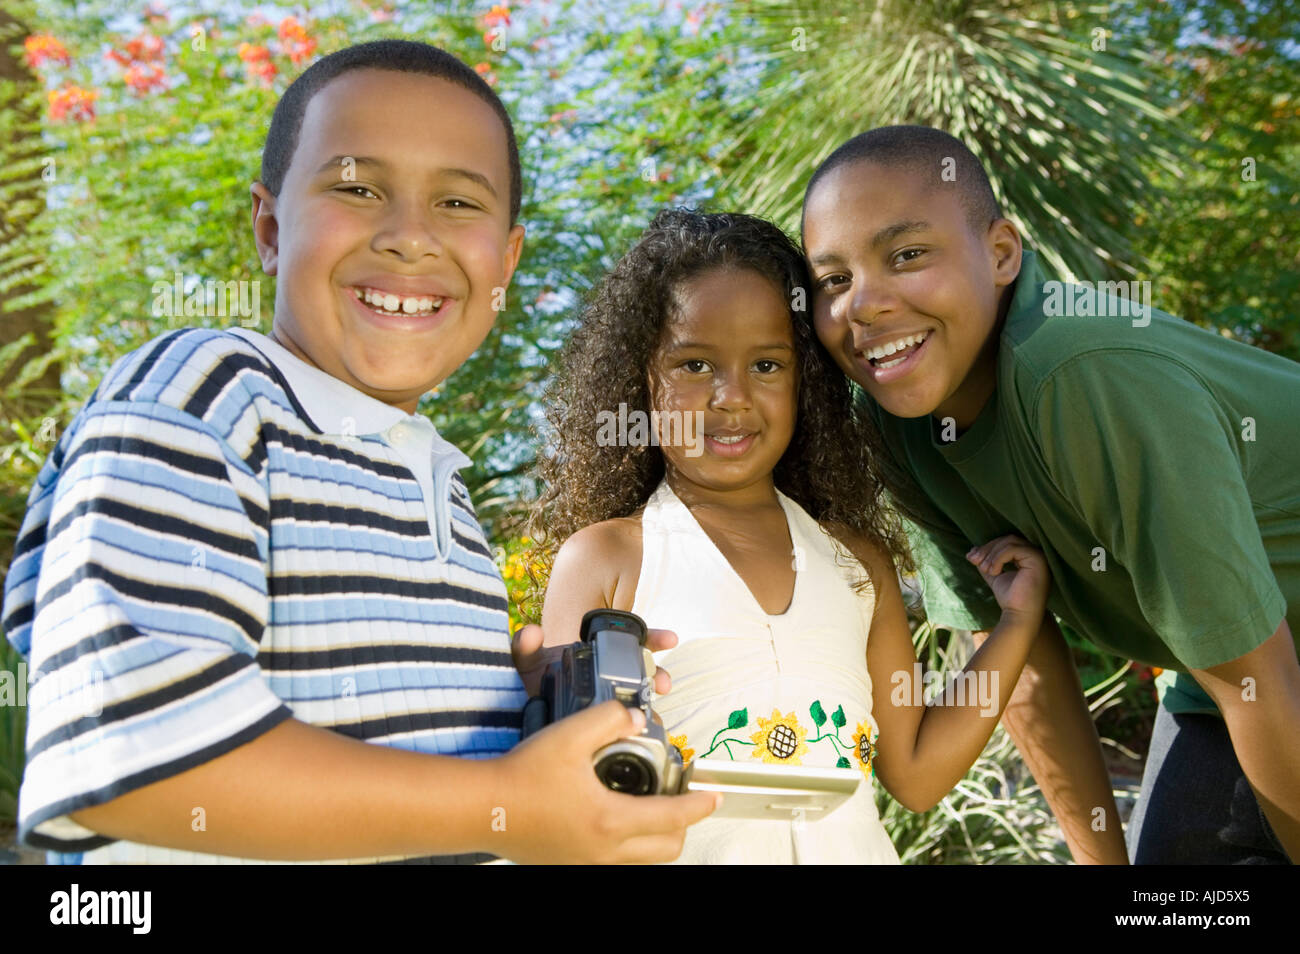 Boy (7-9) holding camcorder, with younger sister (5-6) and older brother (10-12), portrait. Stock Photo